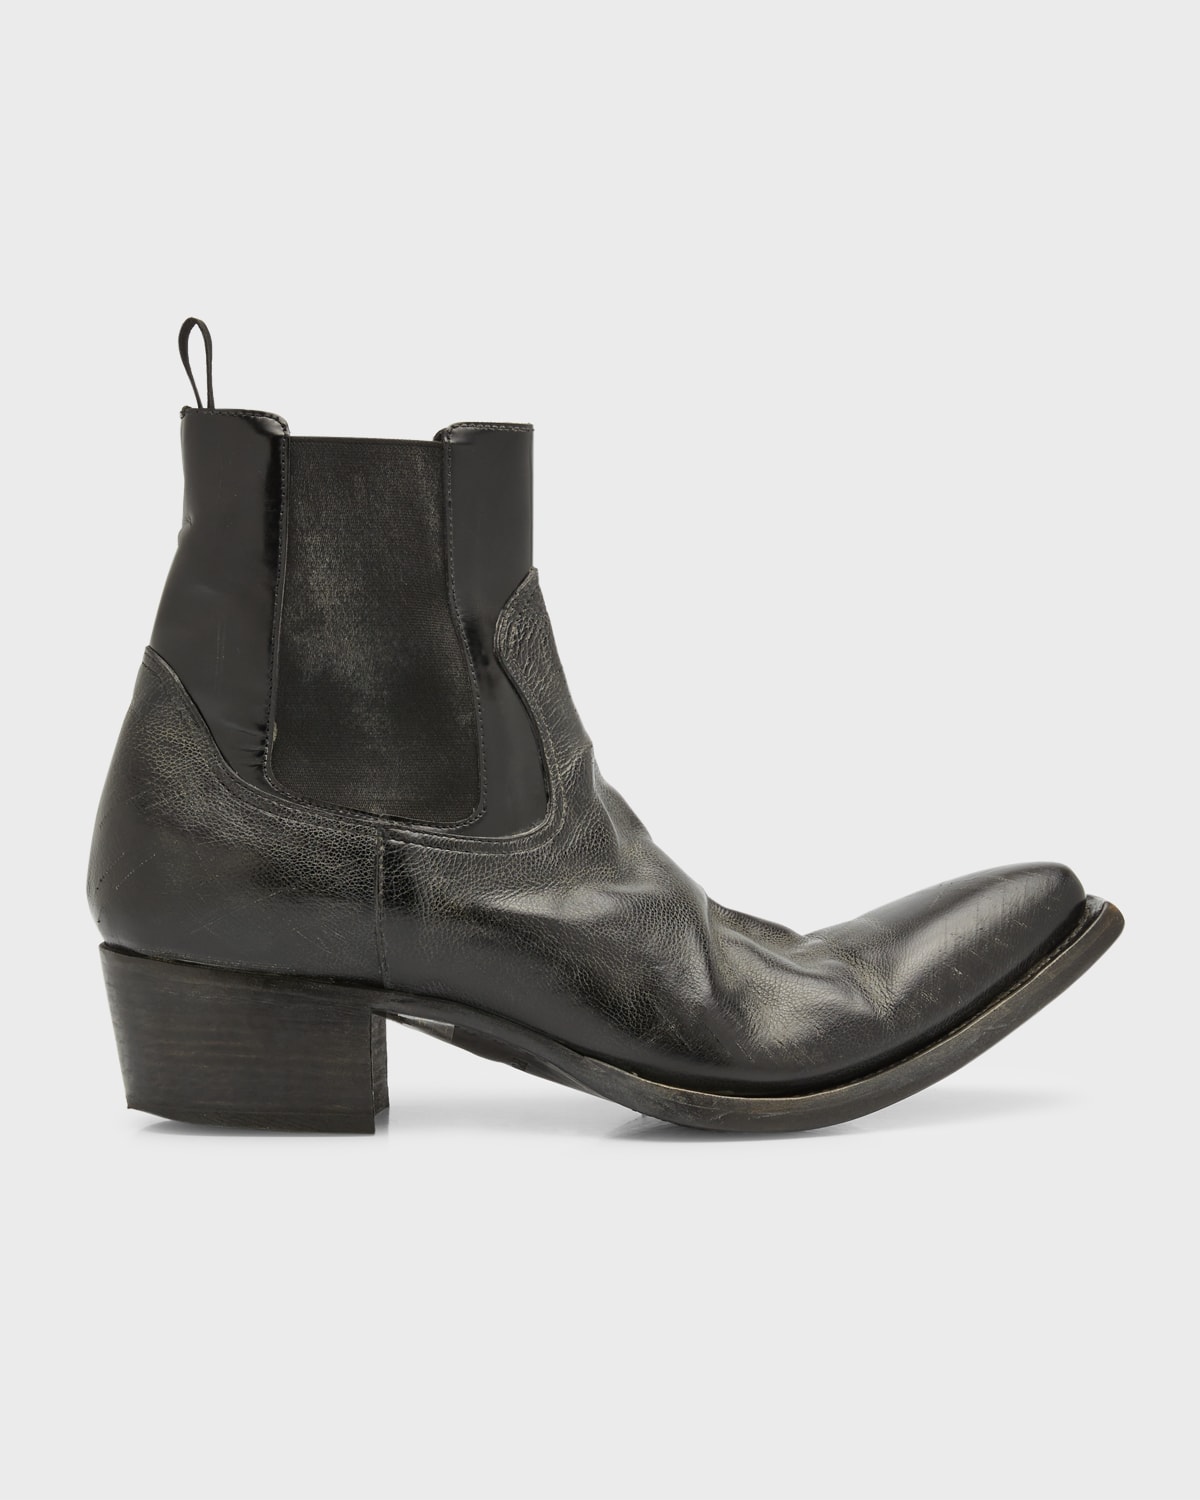 PRADA MEN'S RUNAWAY LEATHER ANKLE BOOTS